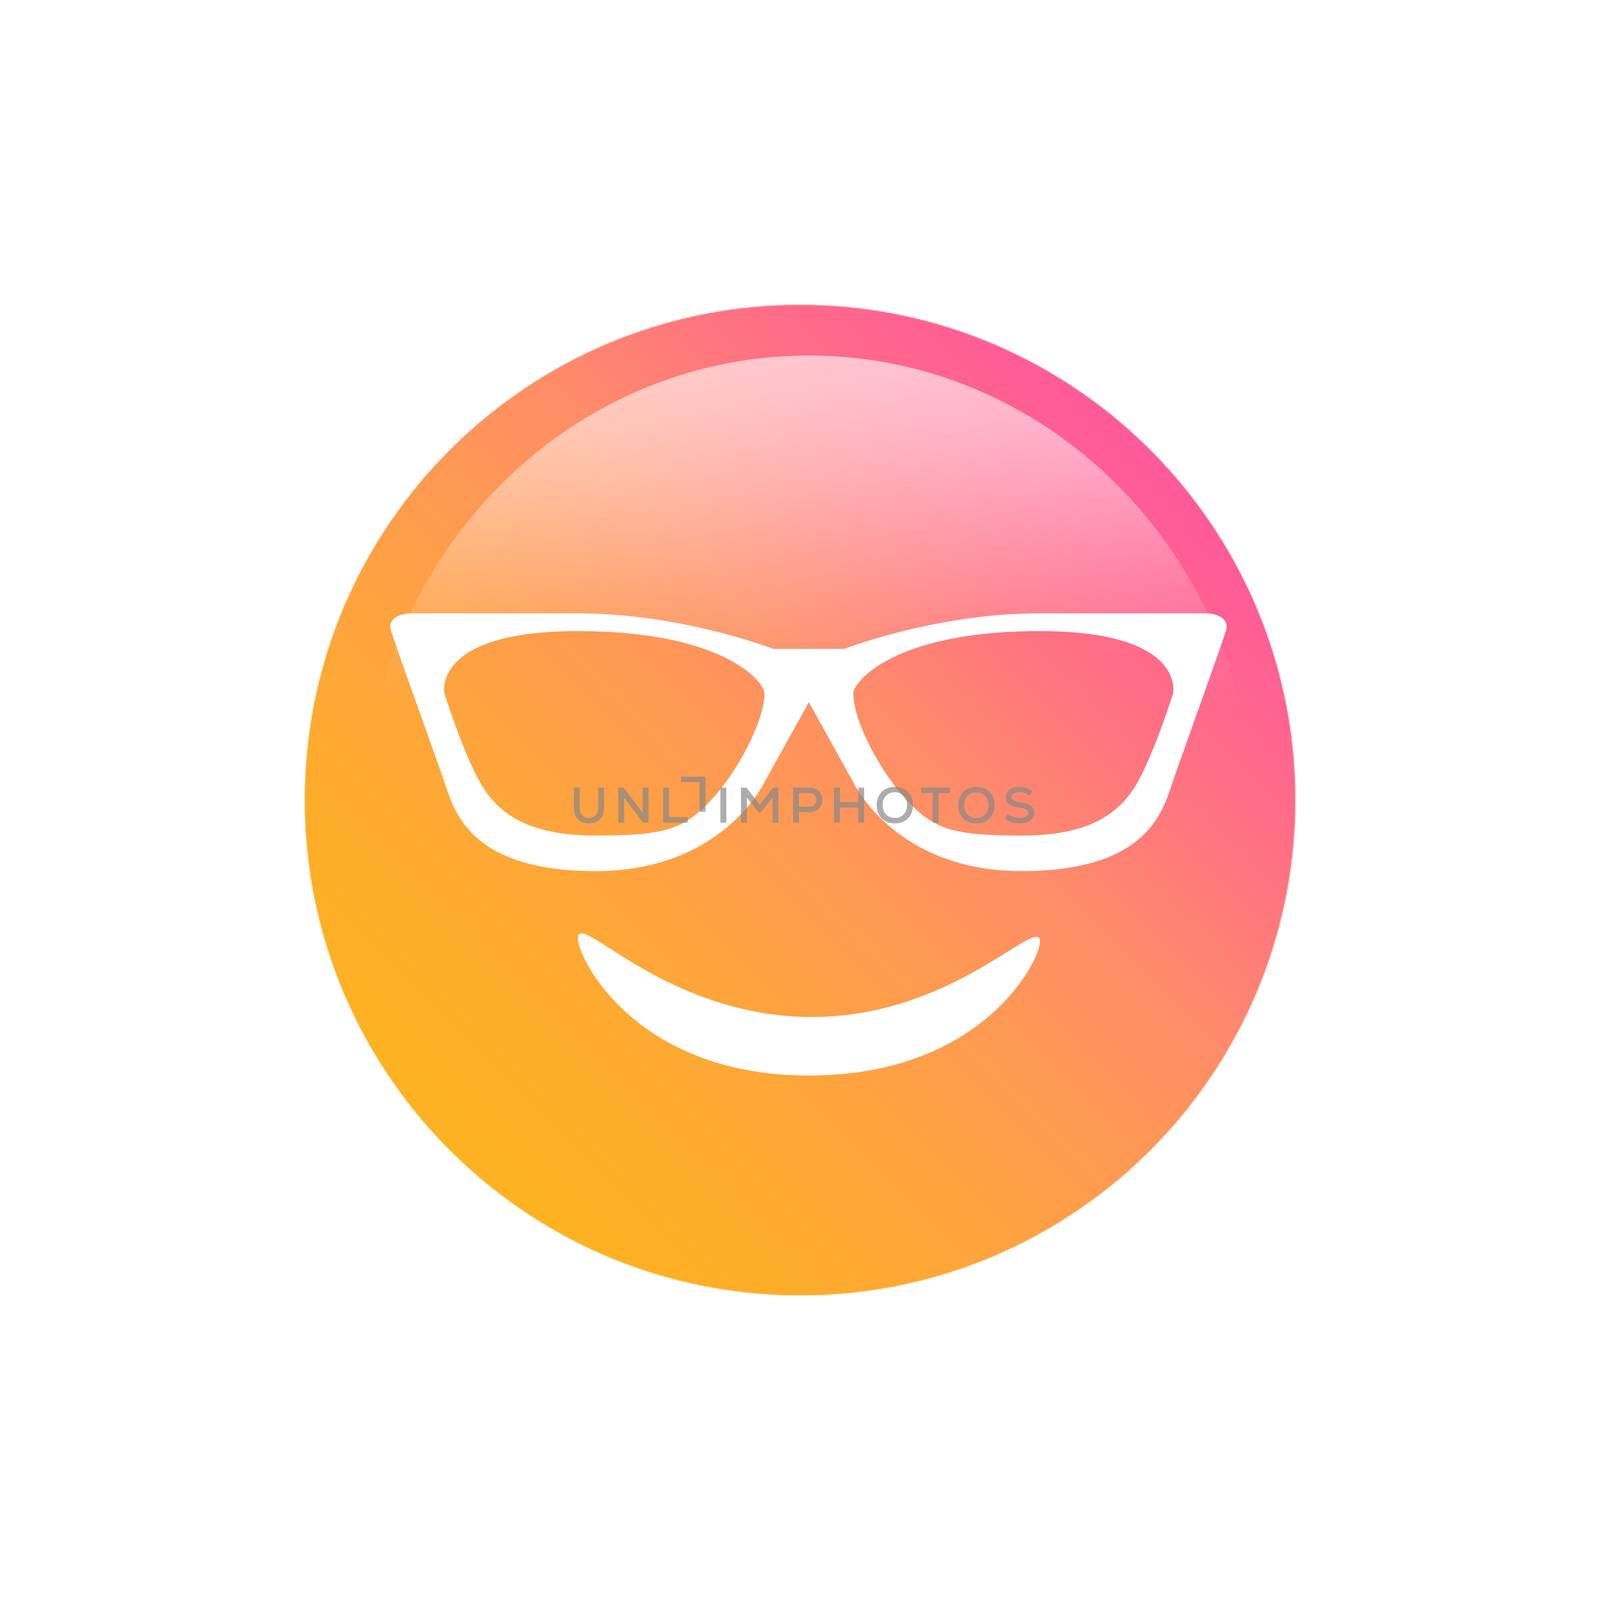 The colorful gradient pink to orange smiley face with sunglasses